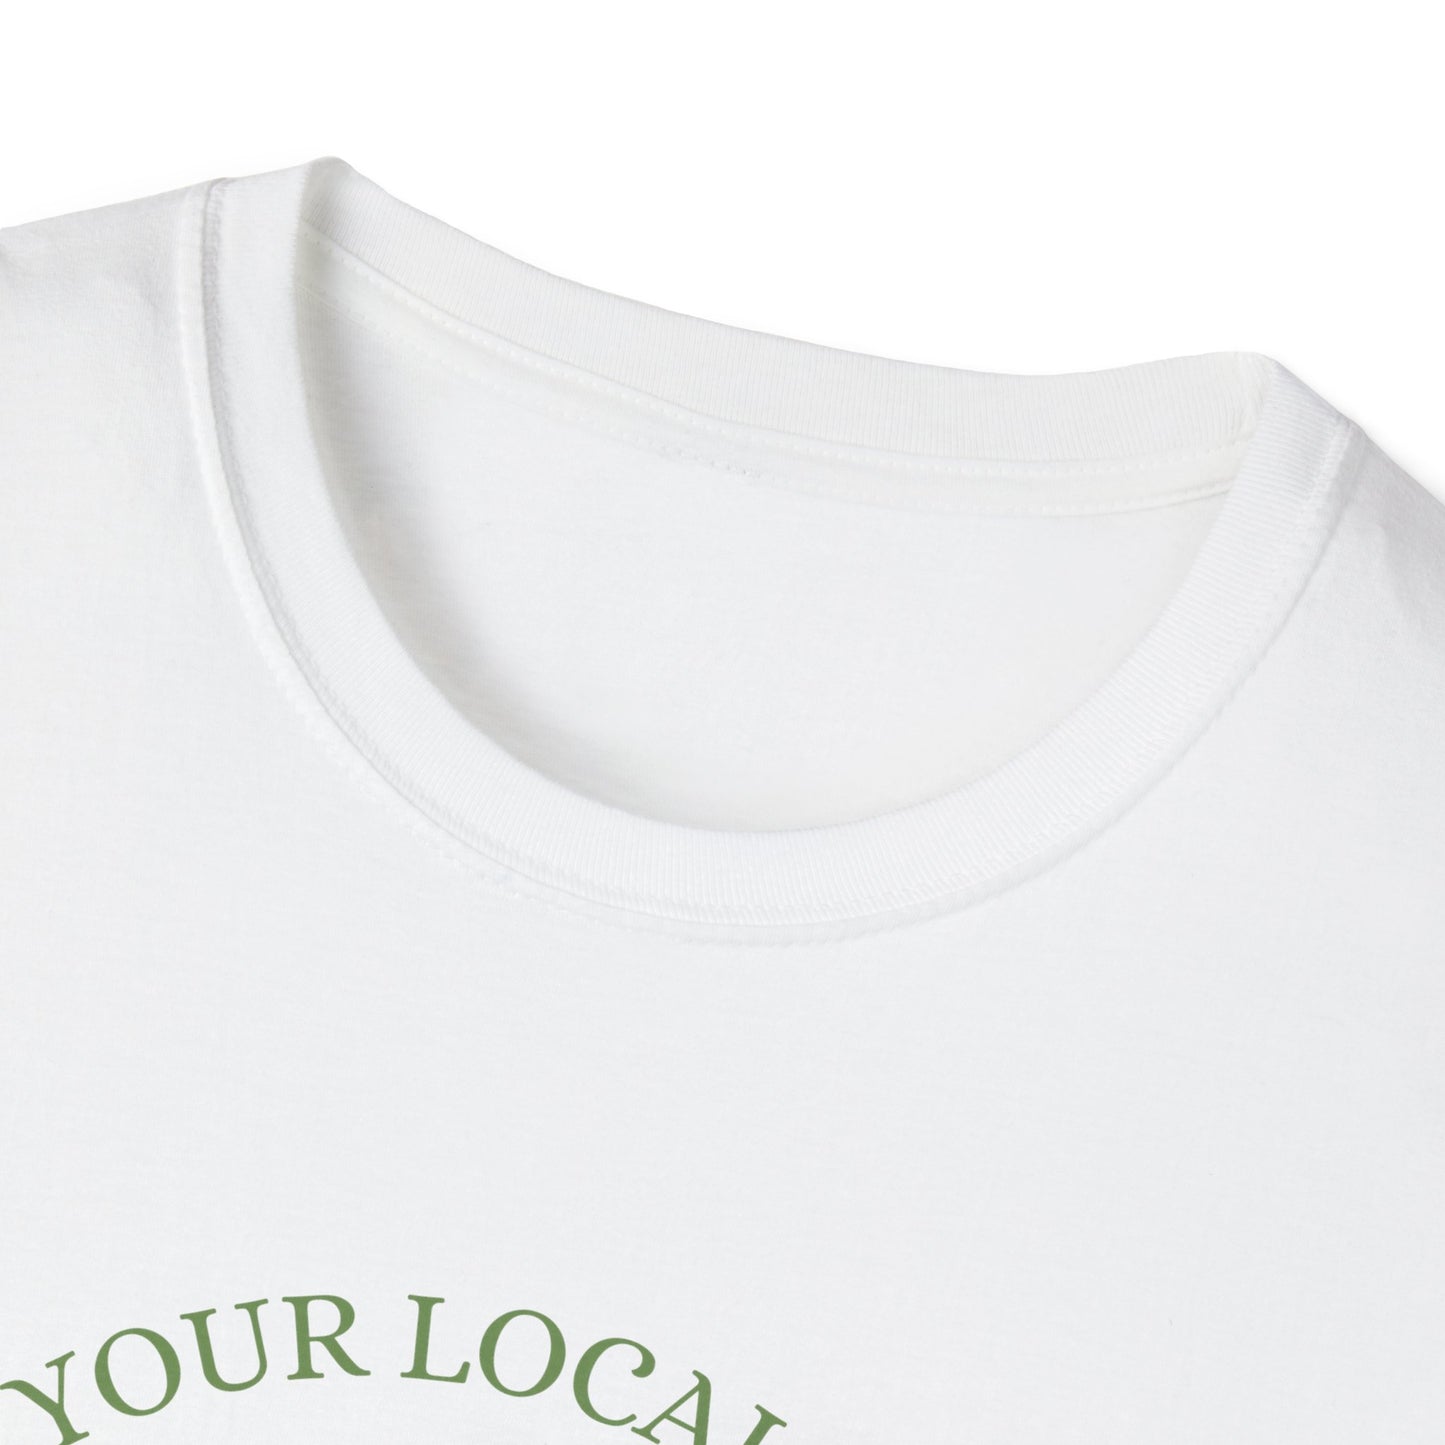 Support Your Local Soap Maker (That'd Be Me) T-Shirt